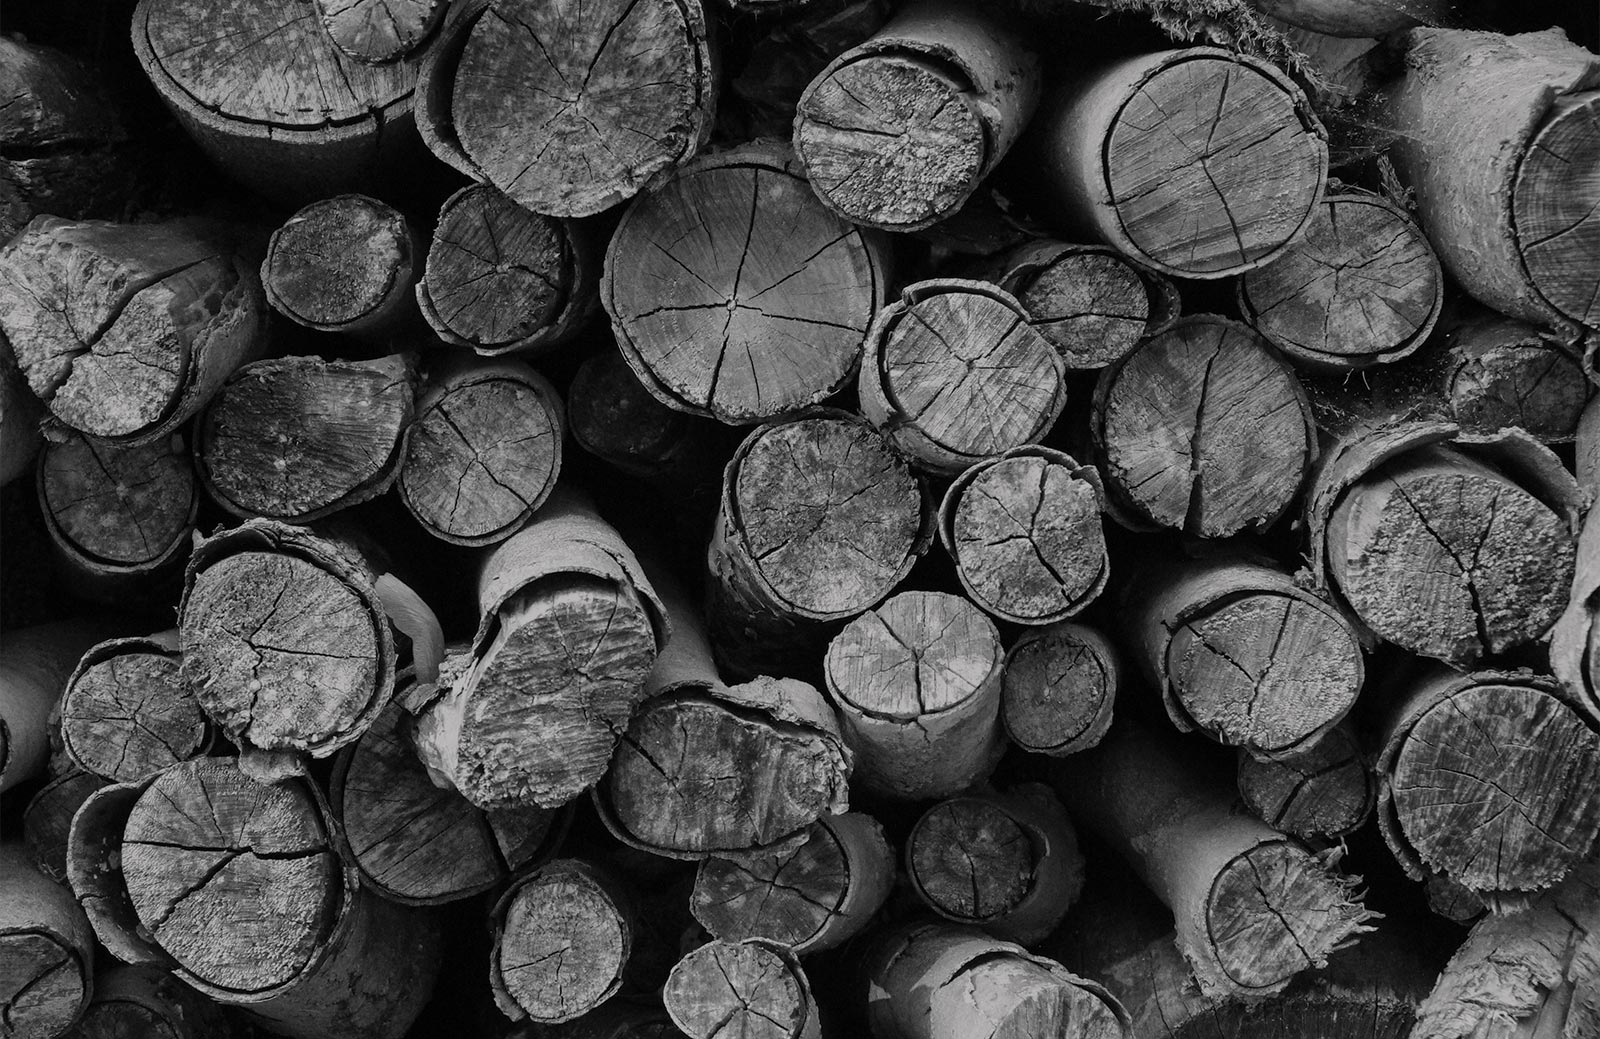 Black and white image of a wood pile